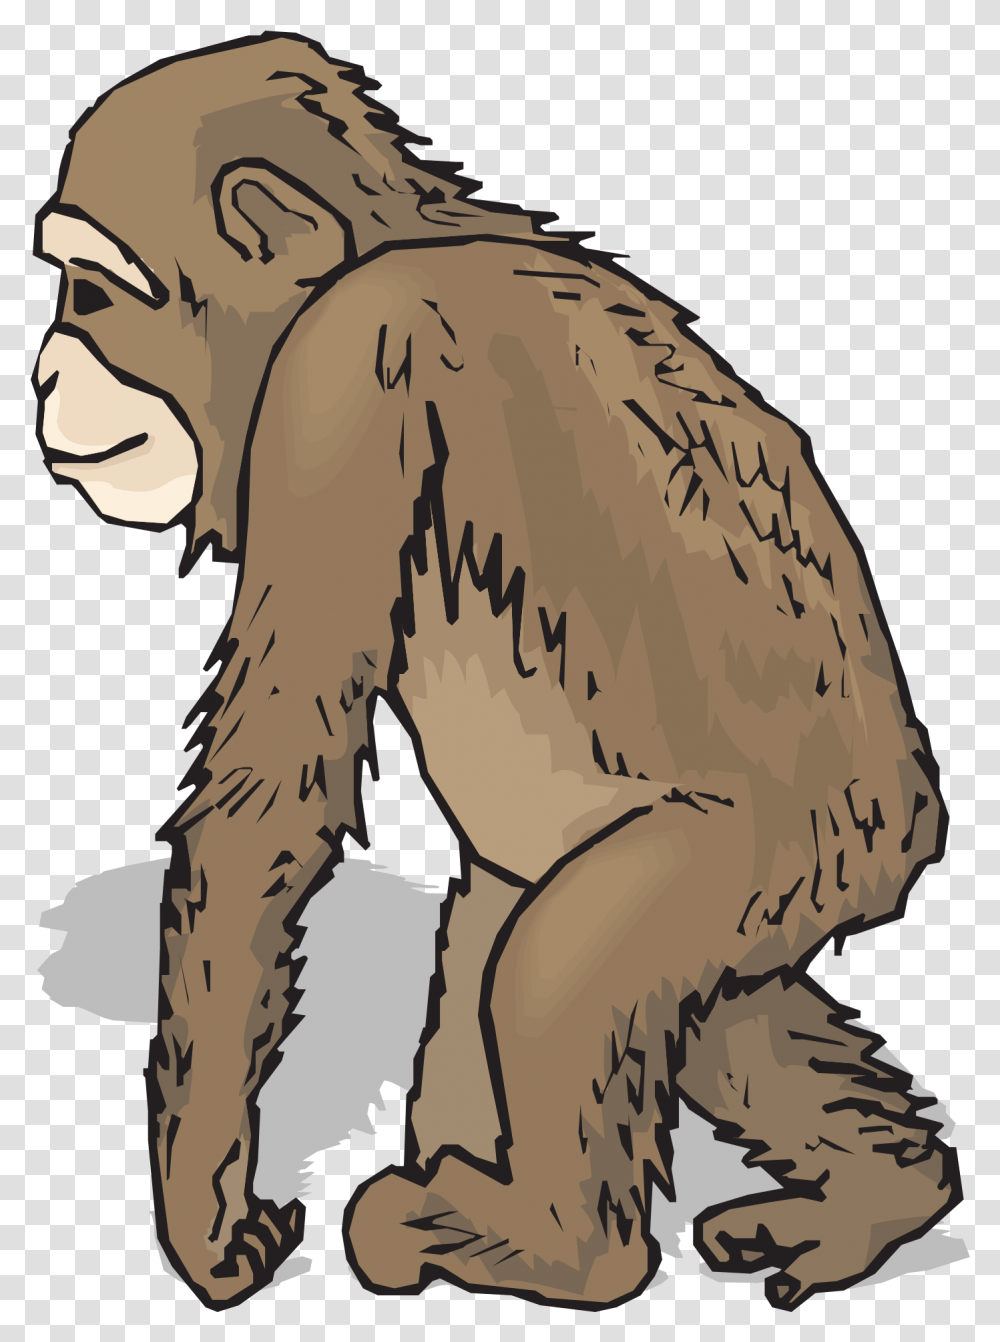 Chimpanzee Clipart Realistic Animal With Fur Cliparts, Mammal, Wildlife, Monkey, Ape Transparent Png